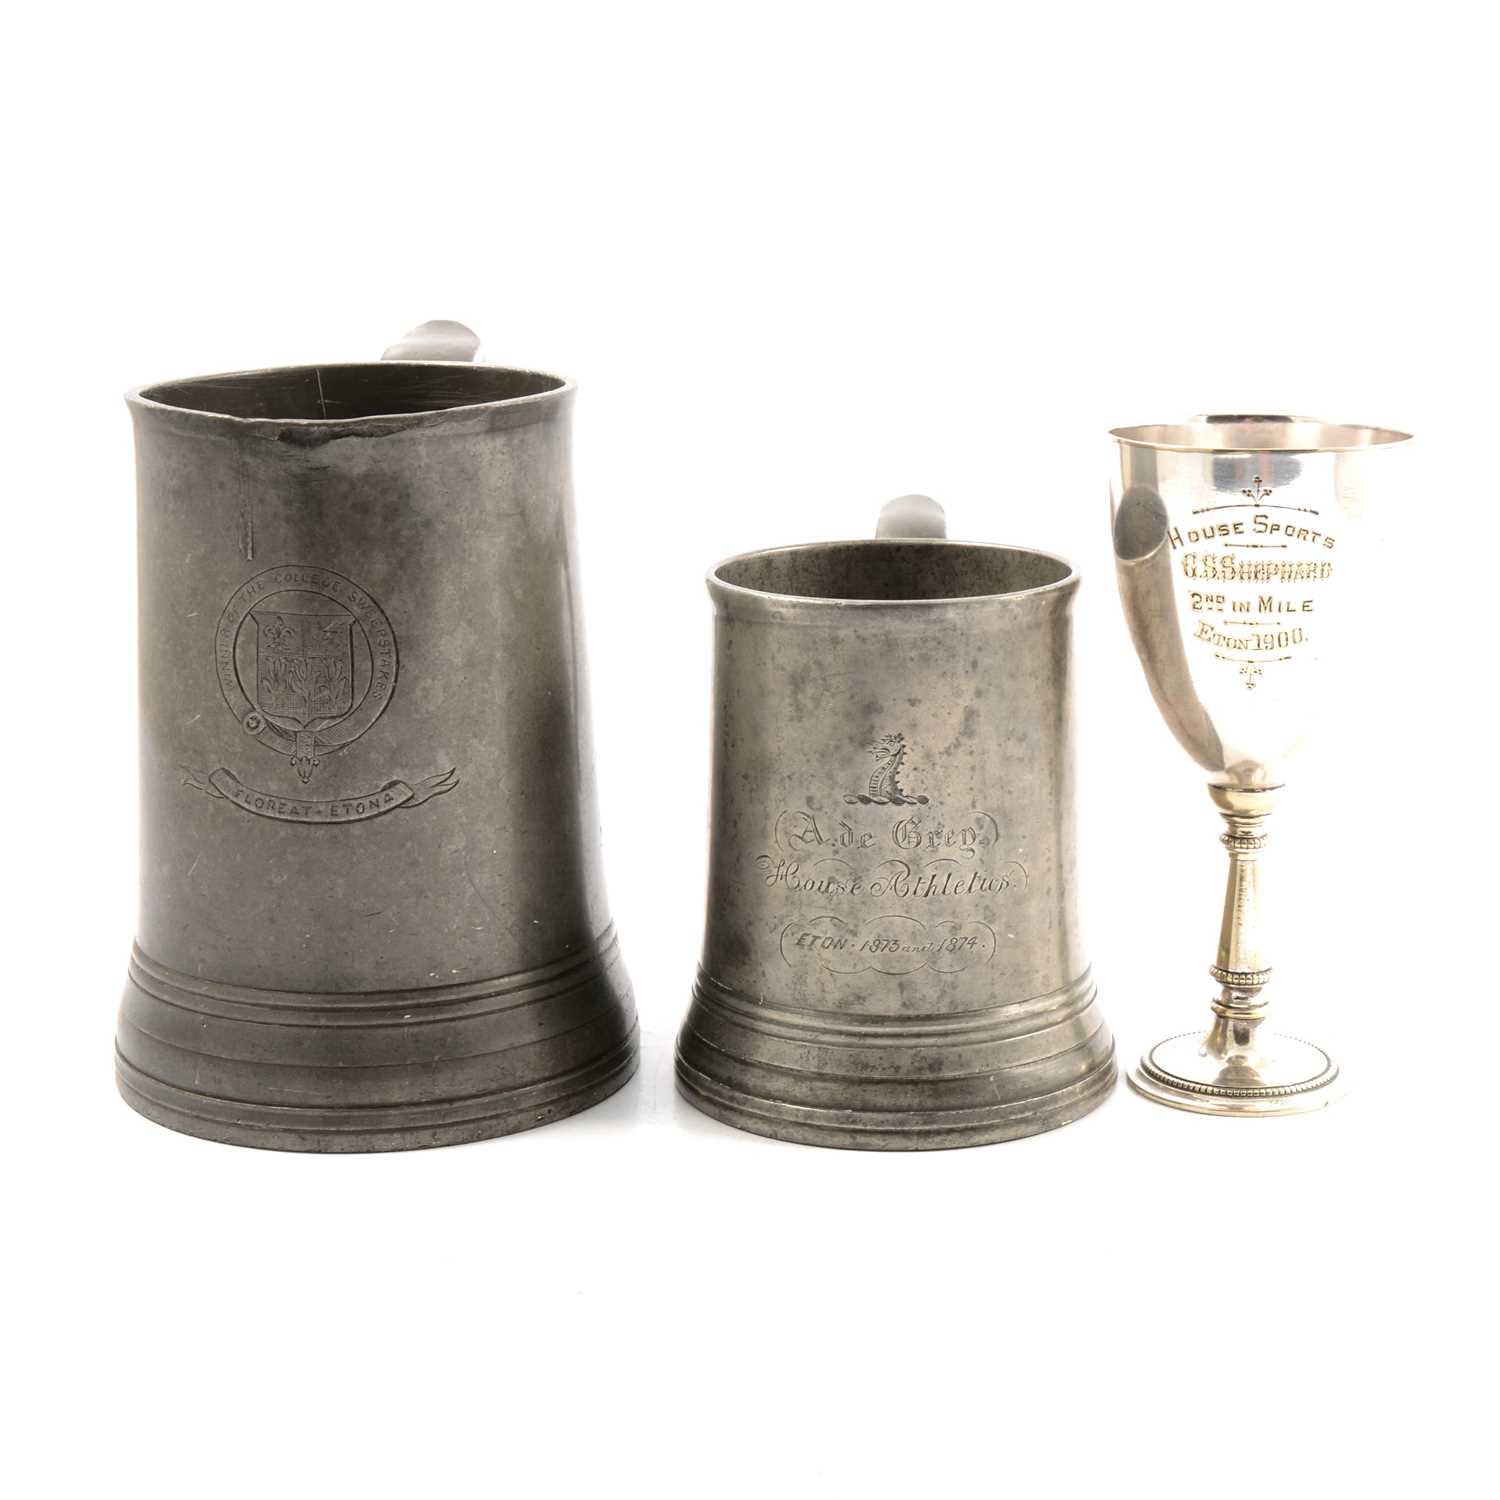 Lot 87 - Eton interest: House Sports trophy awarded to G S Shephard, 1900; and two pewter tankards